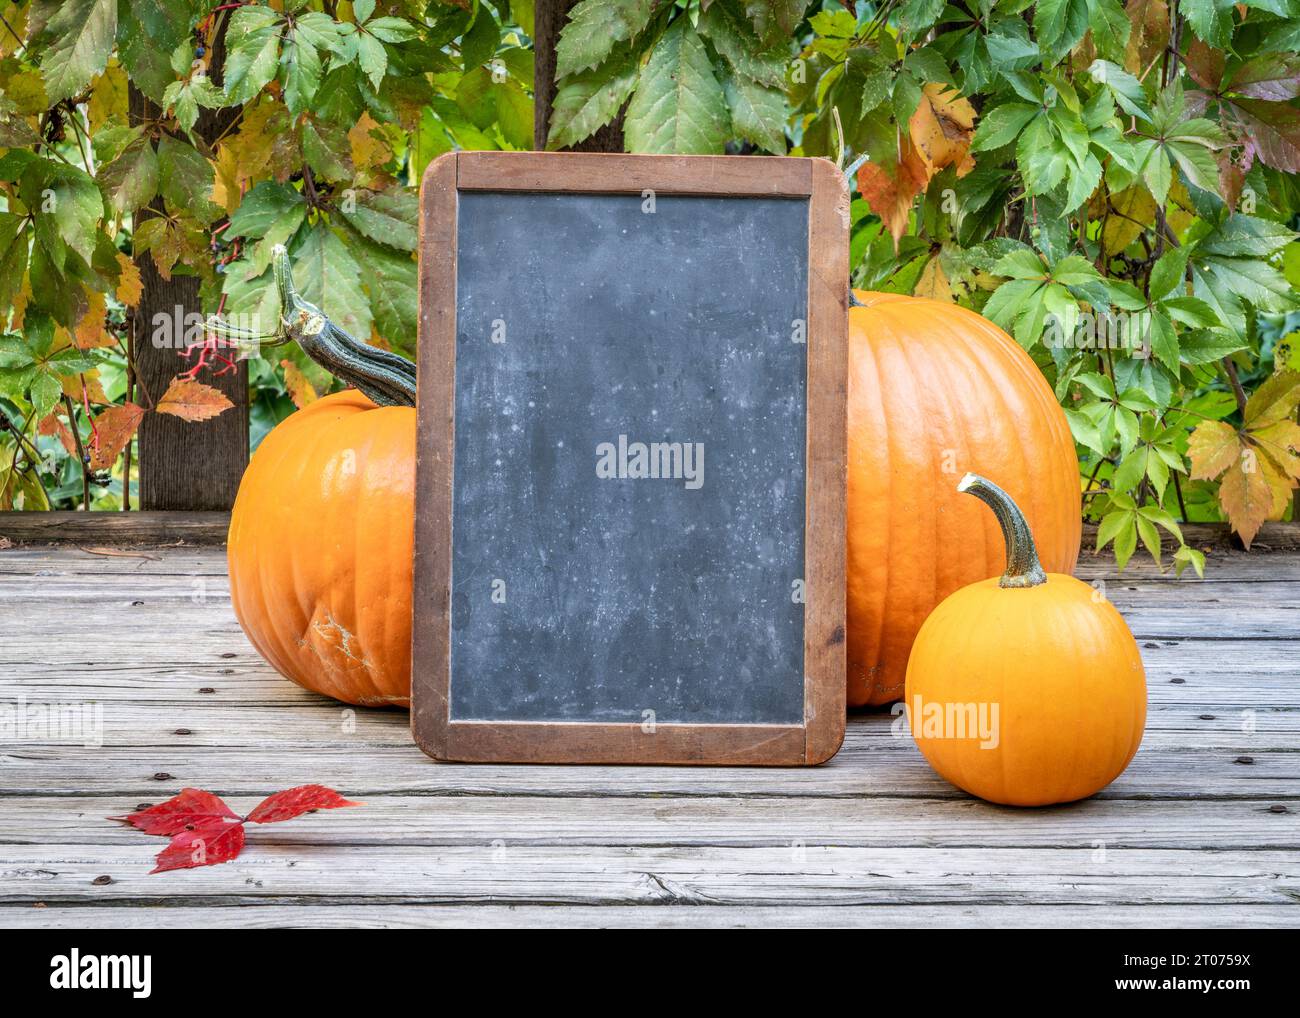 blank retro slate blackboard sign a rustic wooden deck with pumpkins Stock Photo